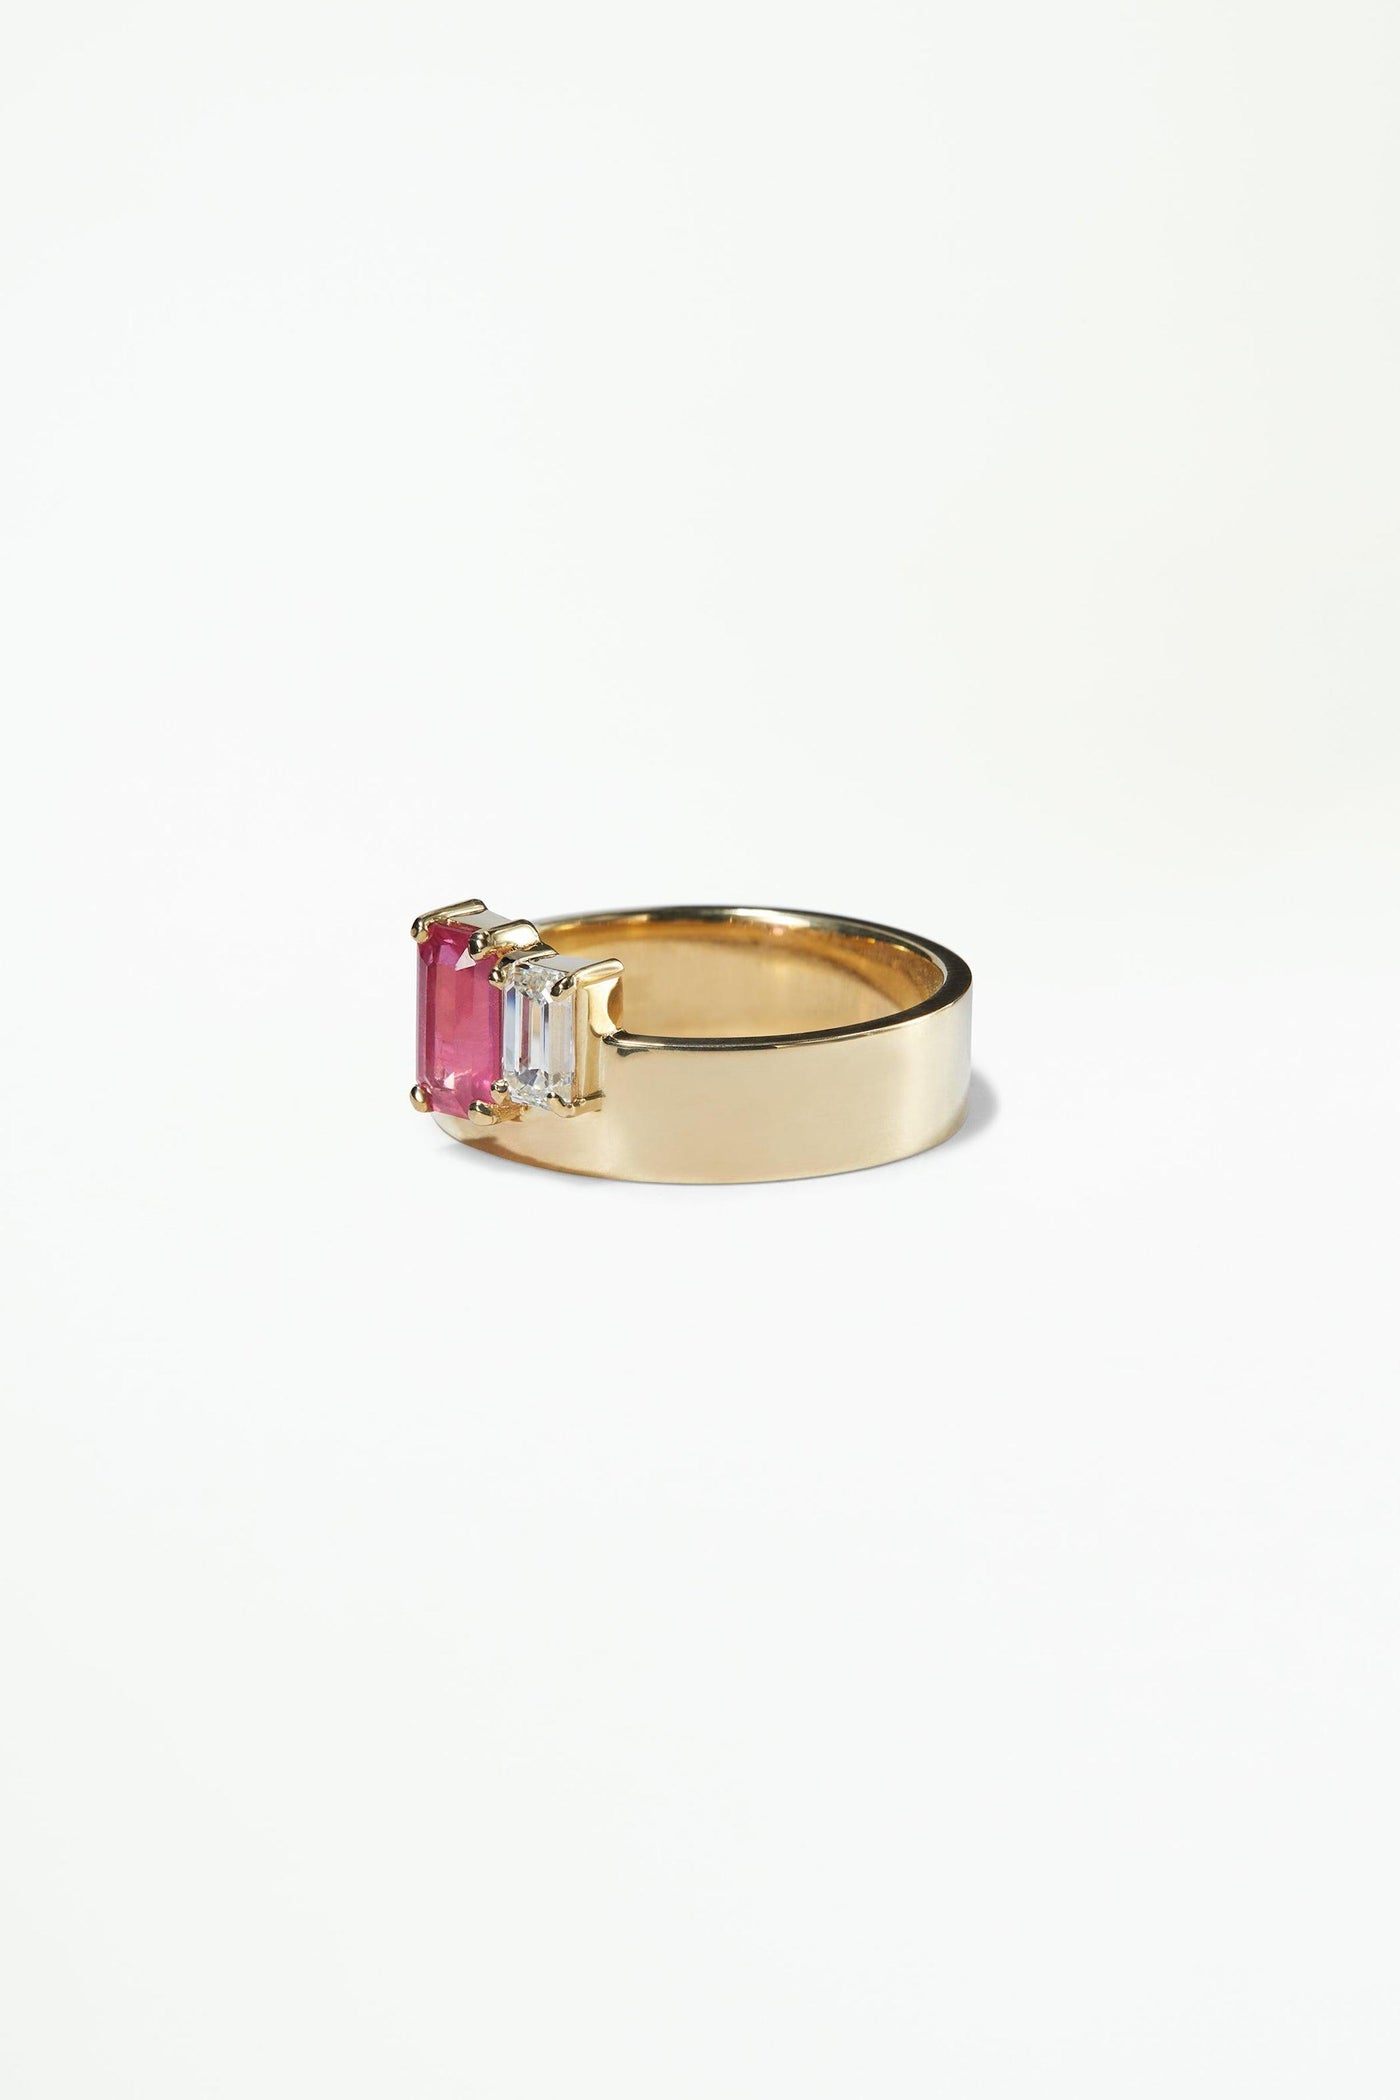 One of a Kind Bricolage Ring No. 9